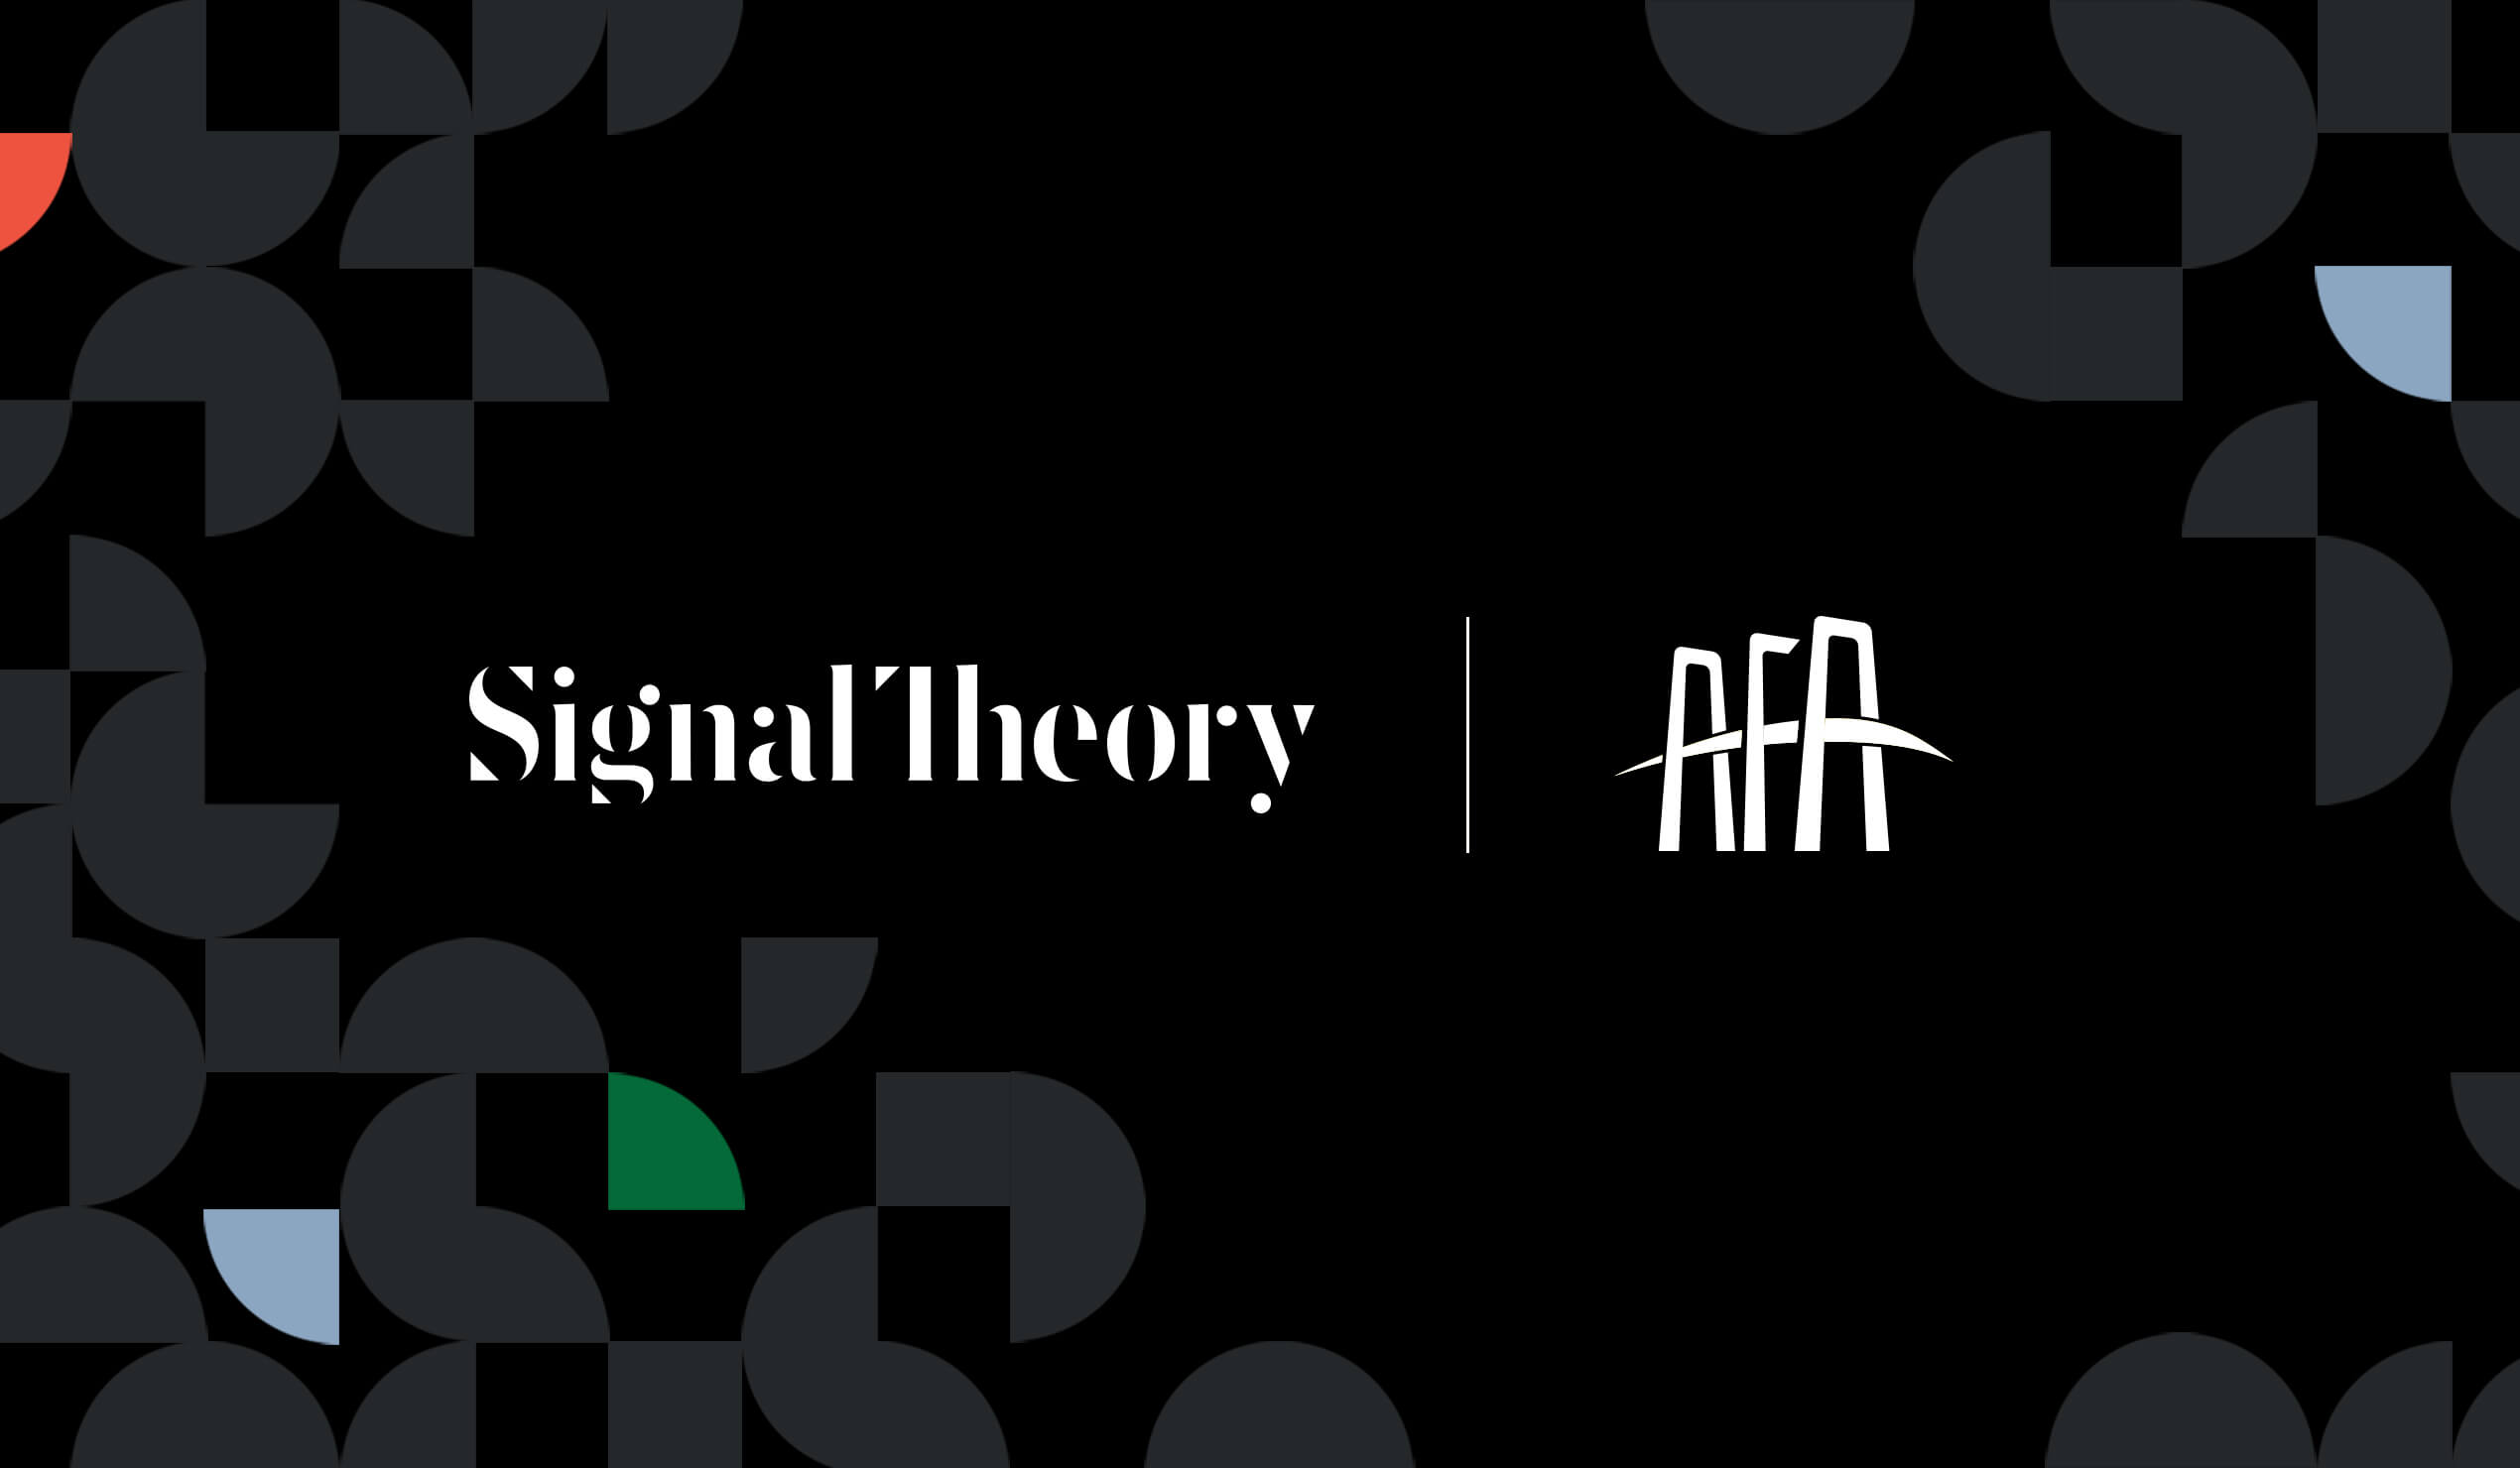 Signal Theory and Agriculture Future of America logos